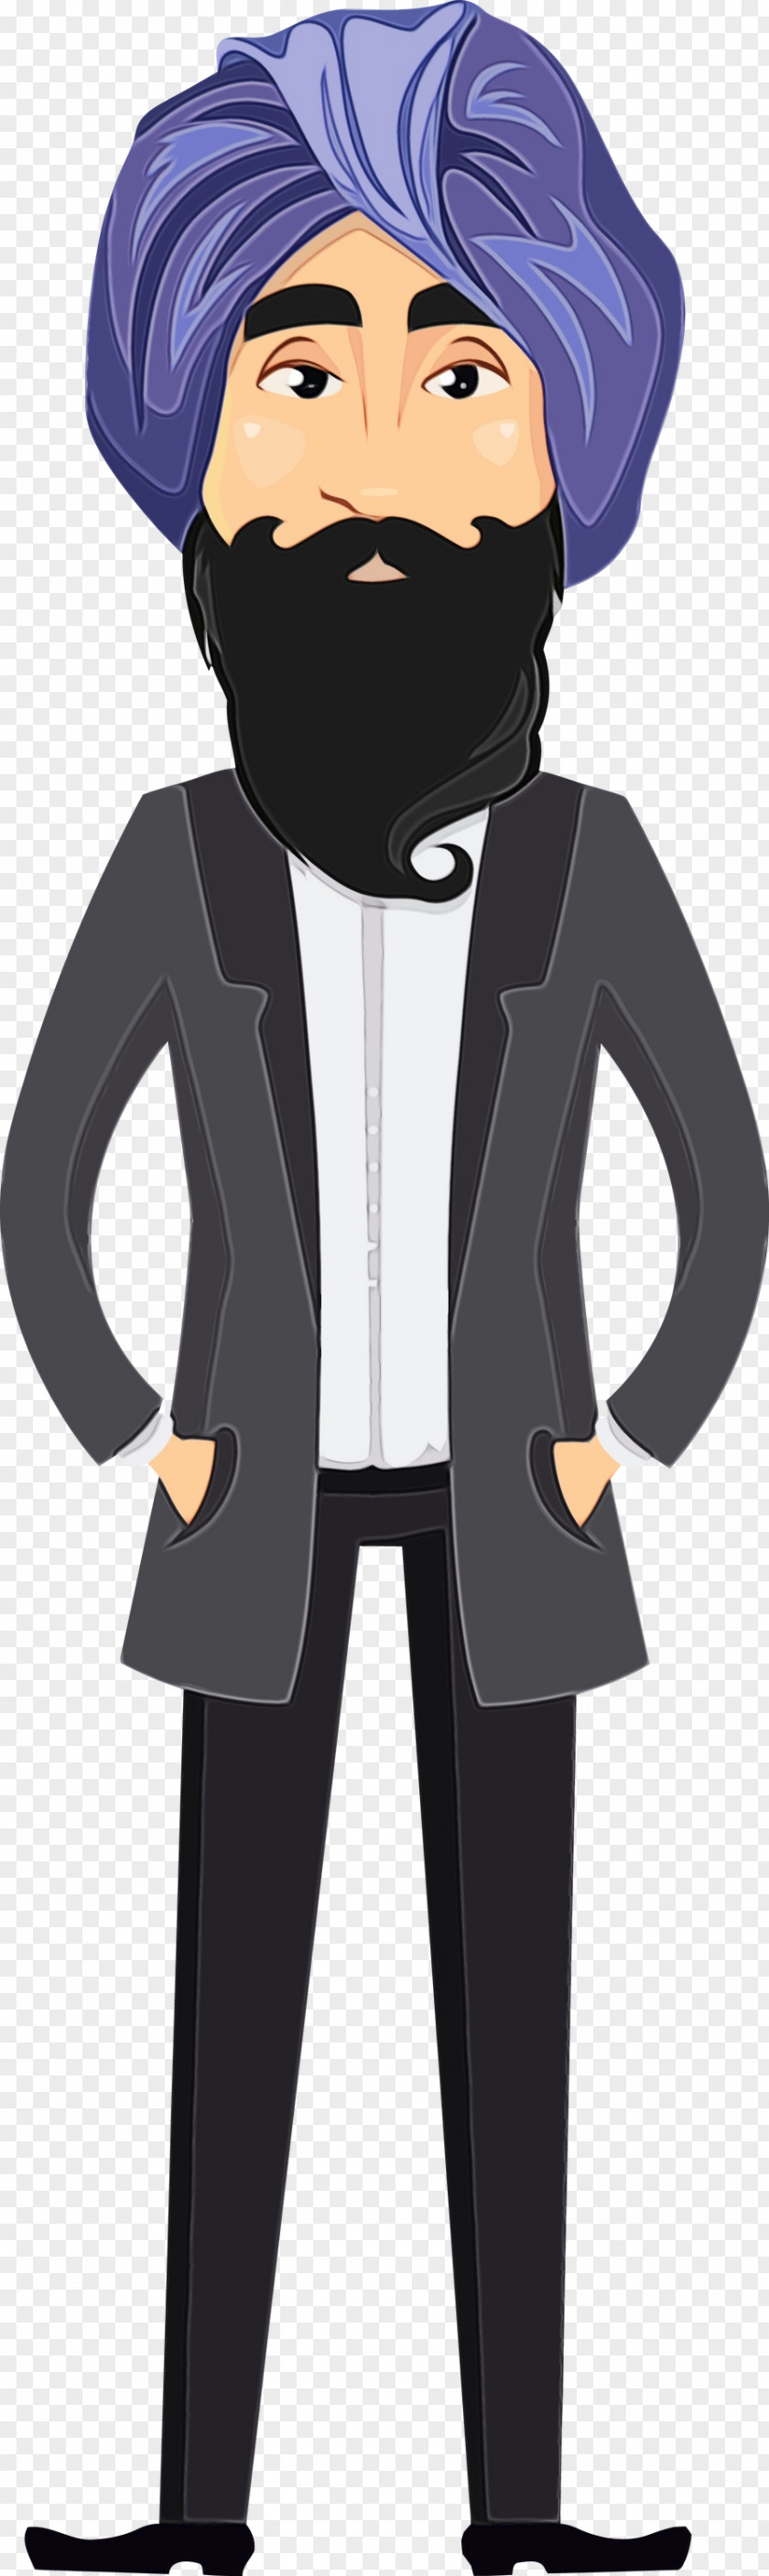 Clothing Outerwear Suit Jacket Cartoon PNG